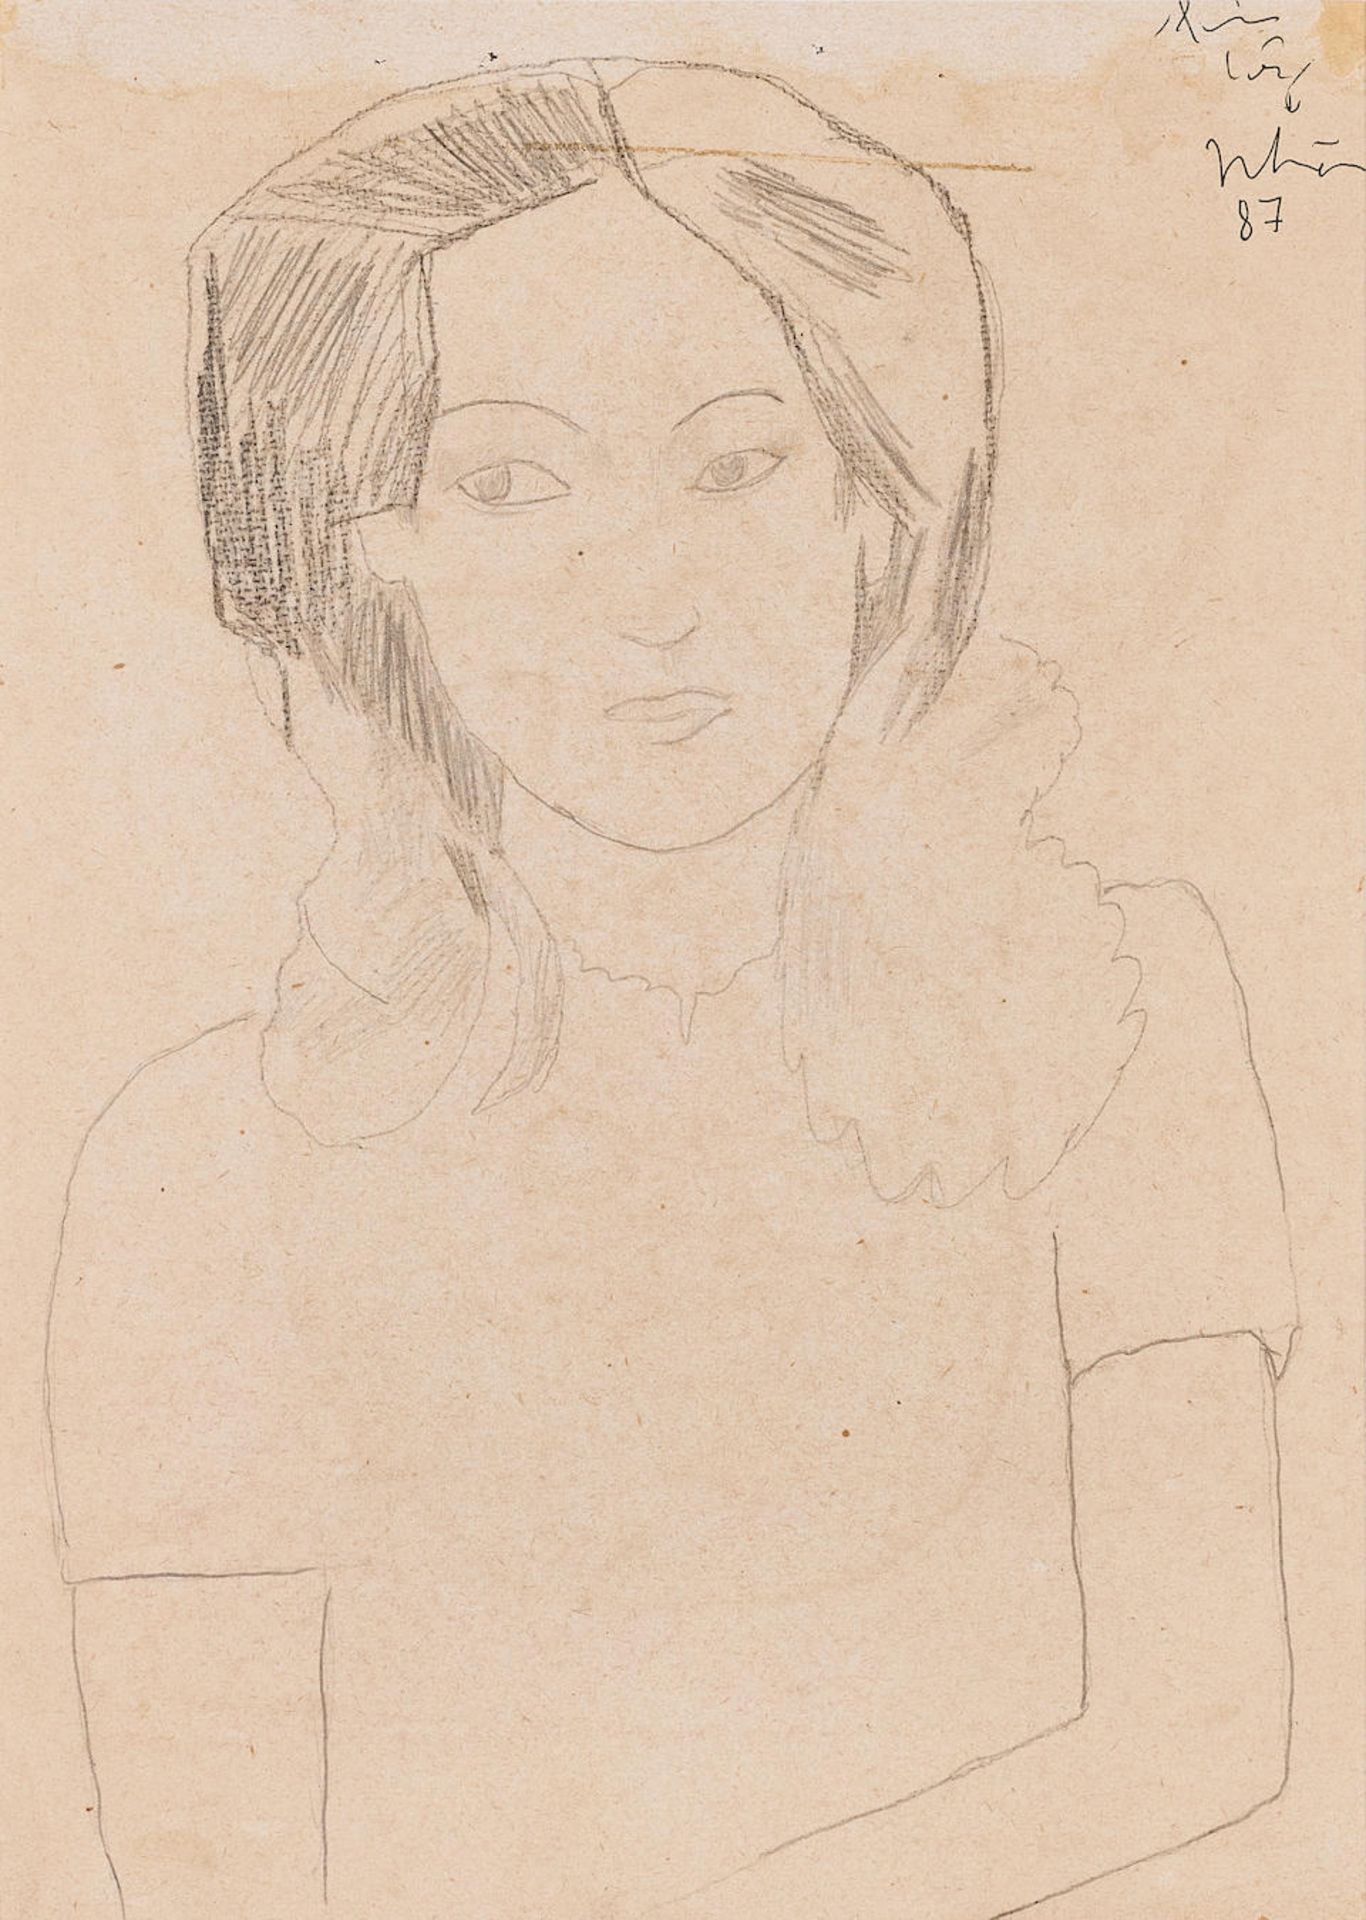 Luu Cong Nhan (Vietnamese, 1931-2007) Four drawings with portrait - Image 2 of 9